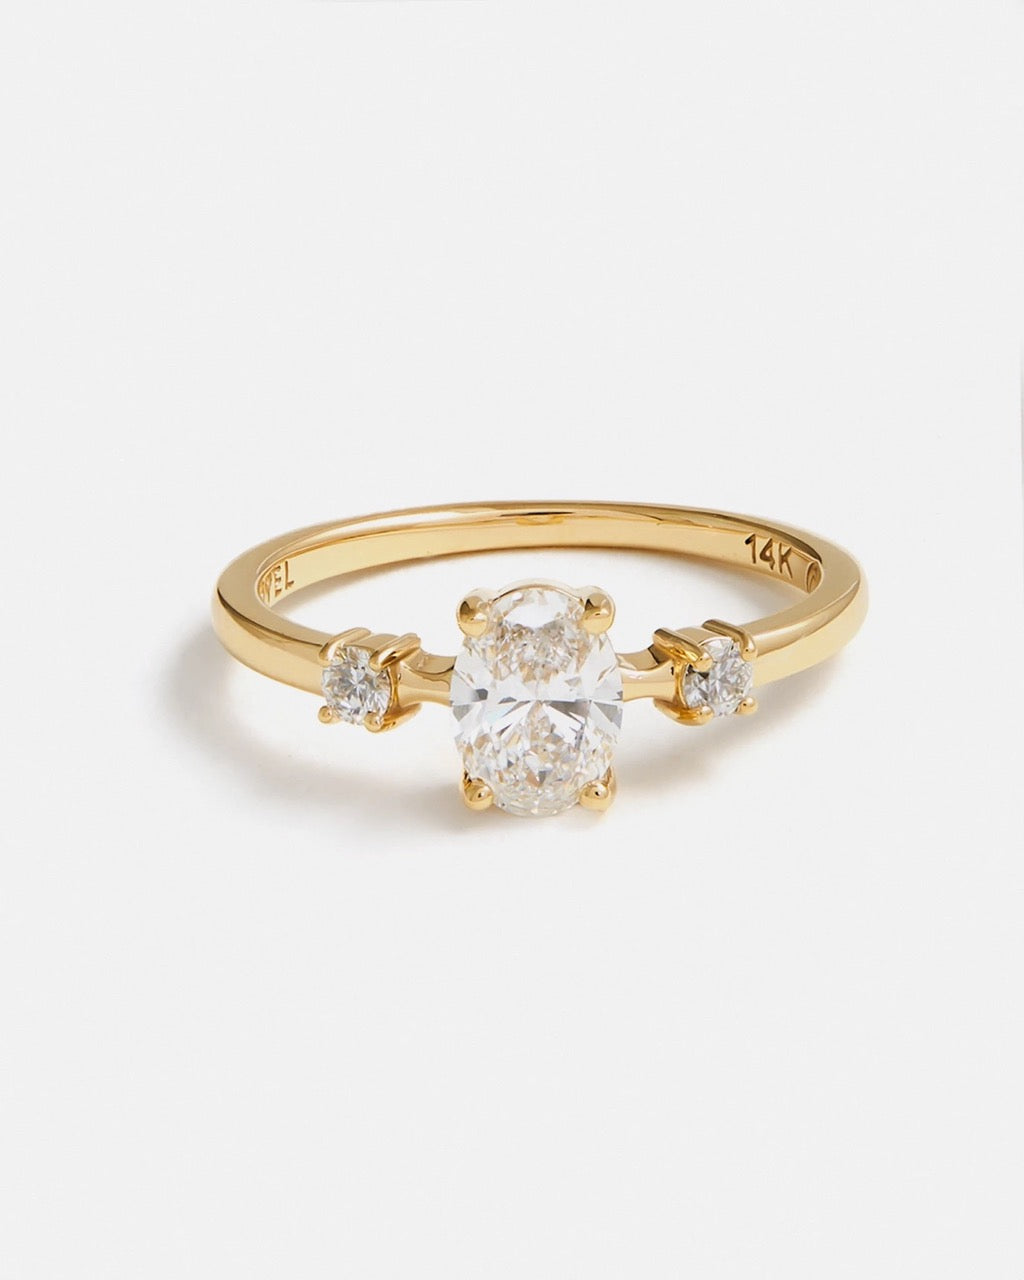 Custom Ring - Ellipse Trio Ring in Fairmined Gold and Lab-Grown Diamonds